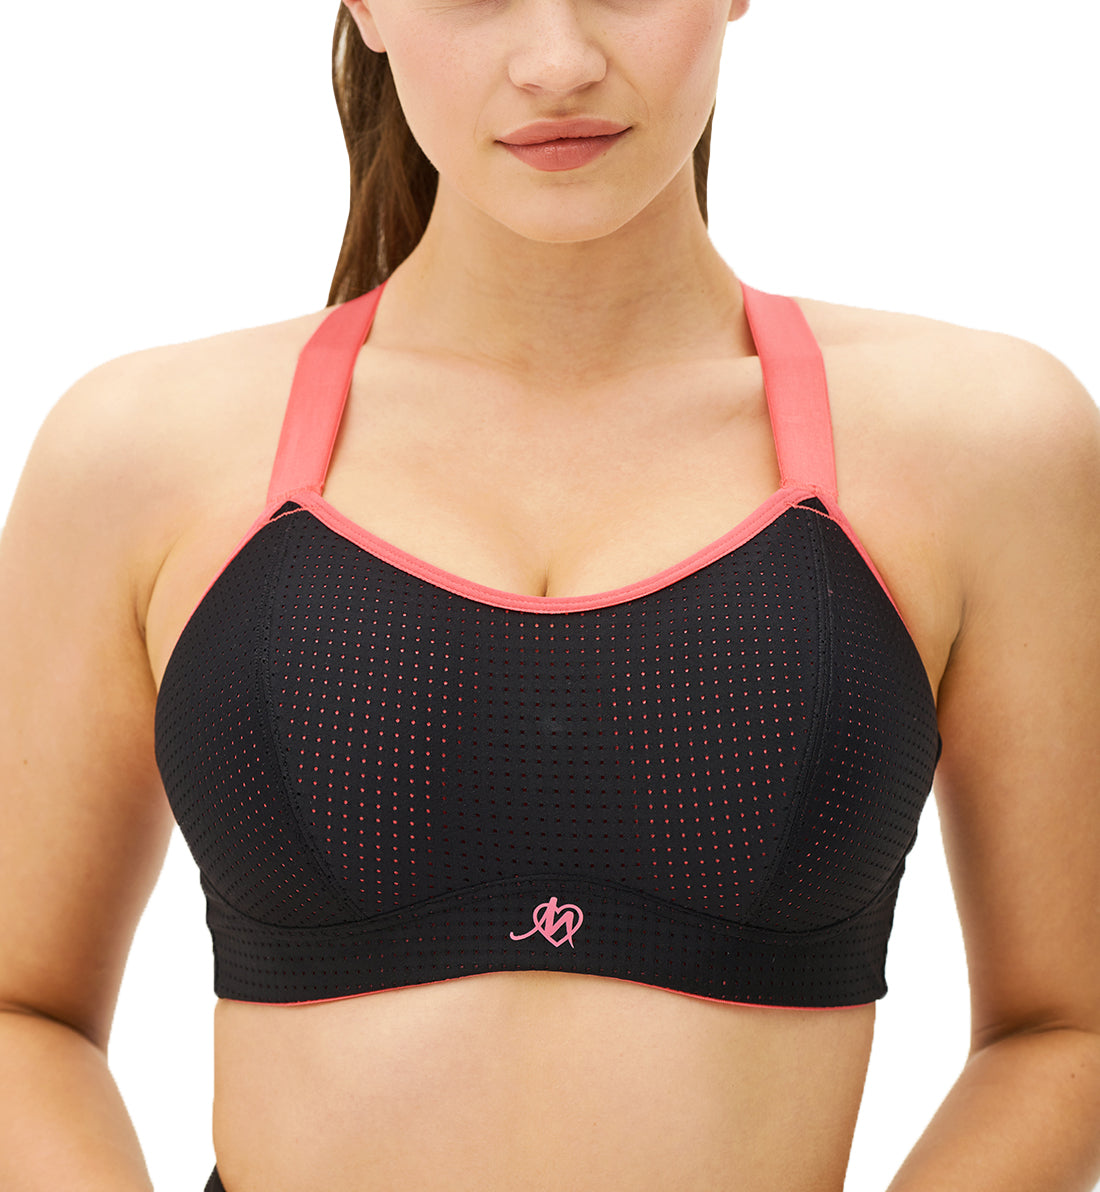 Pour Moi Energy Empower Underwire Light Padded Convertible Sports Bra (97003),32DD,Black/Coral - Black/Coral,32DD